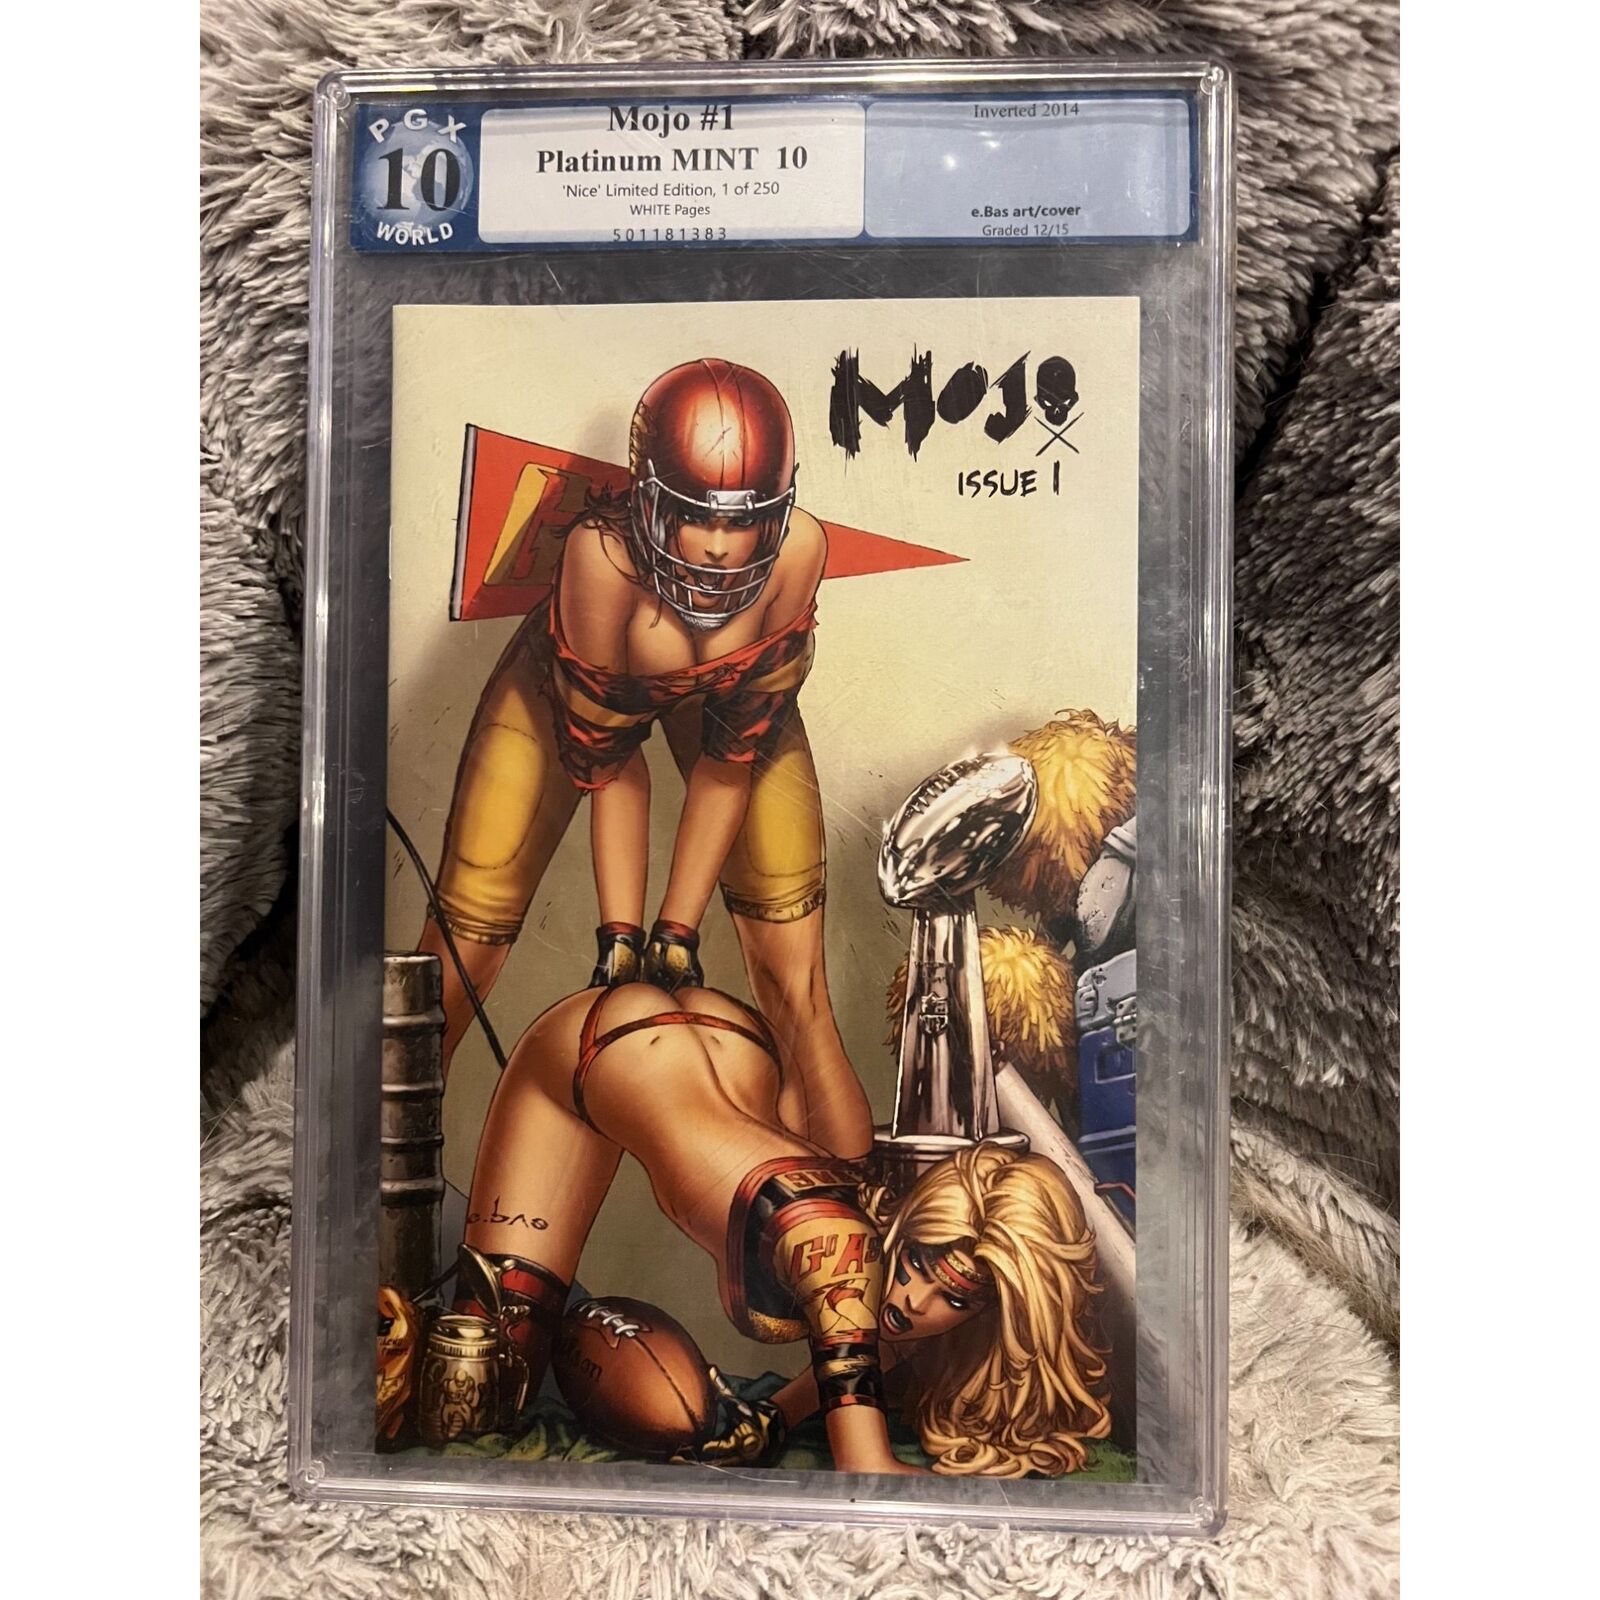 MOJO #1, GRADED PLATINUM MINT 10 by PGX. Art and cover by ebas. \